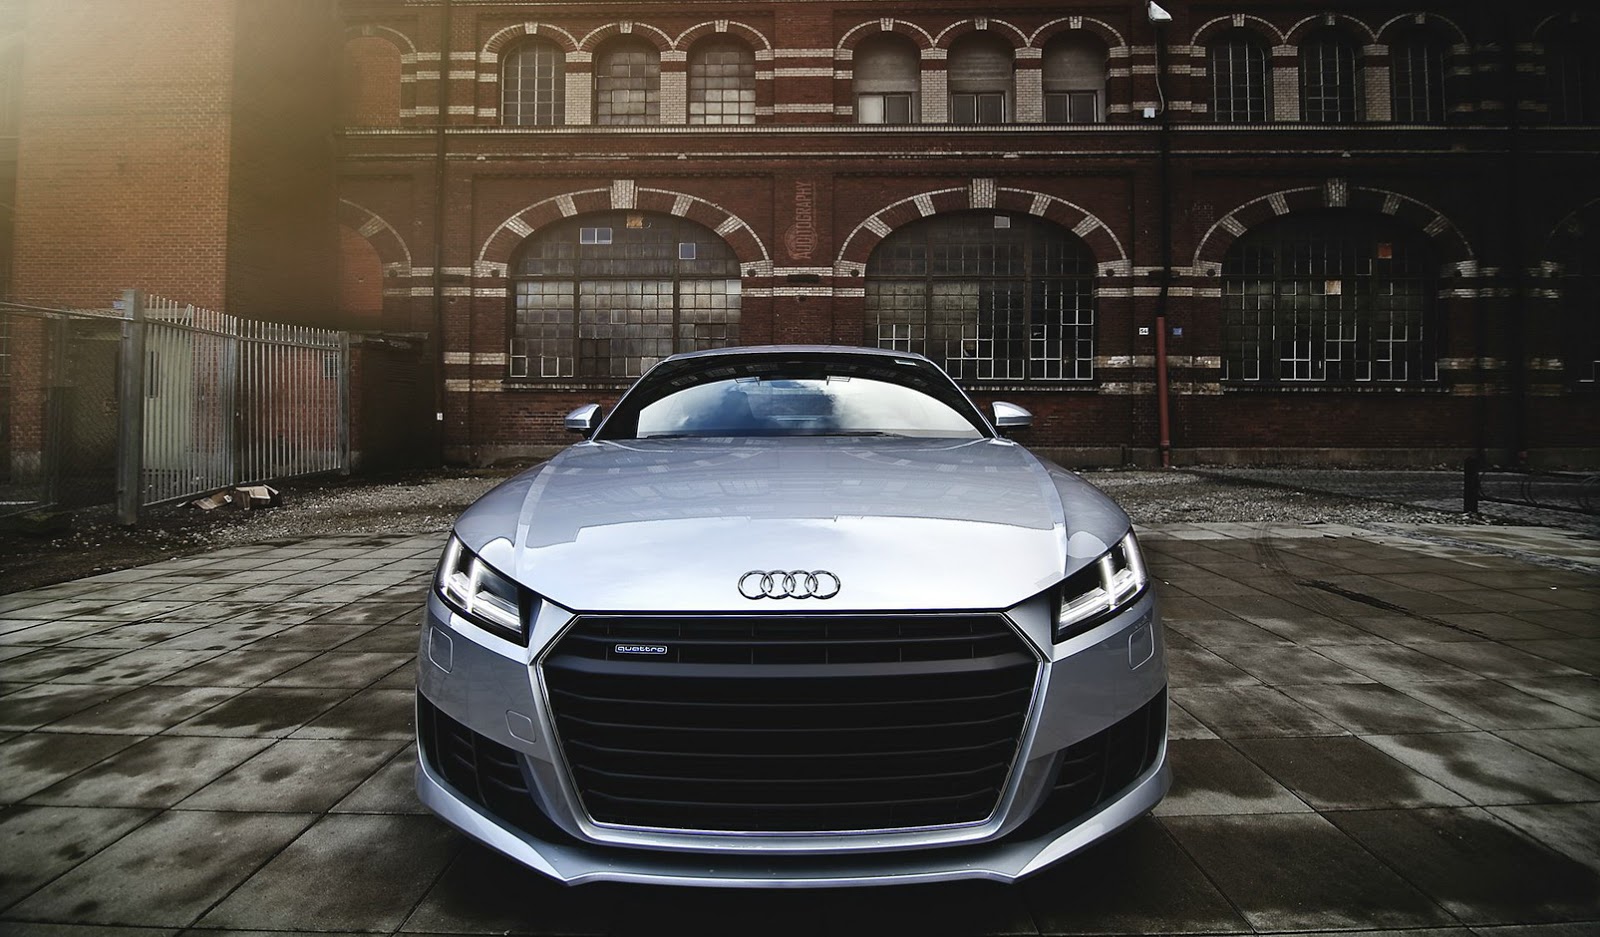 2015 Audi TT Is The Perfect Snow Angel, Carscoops